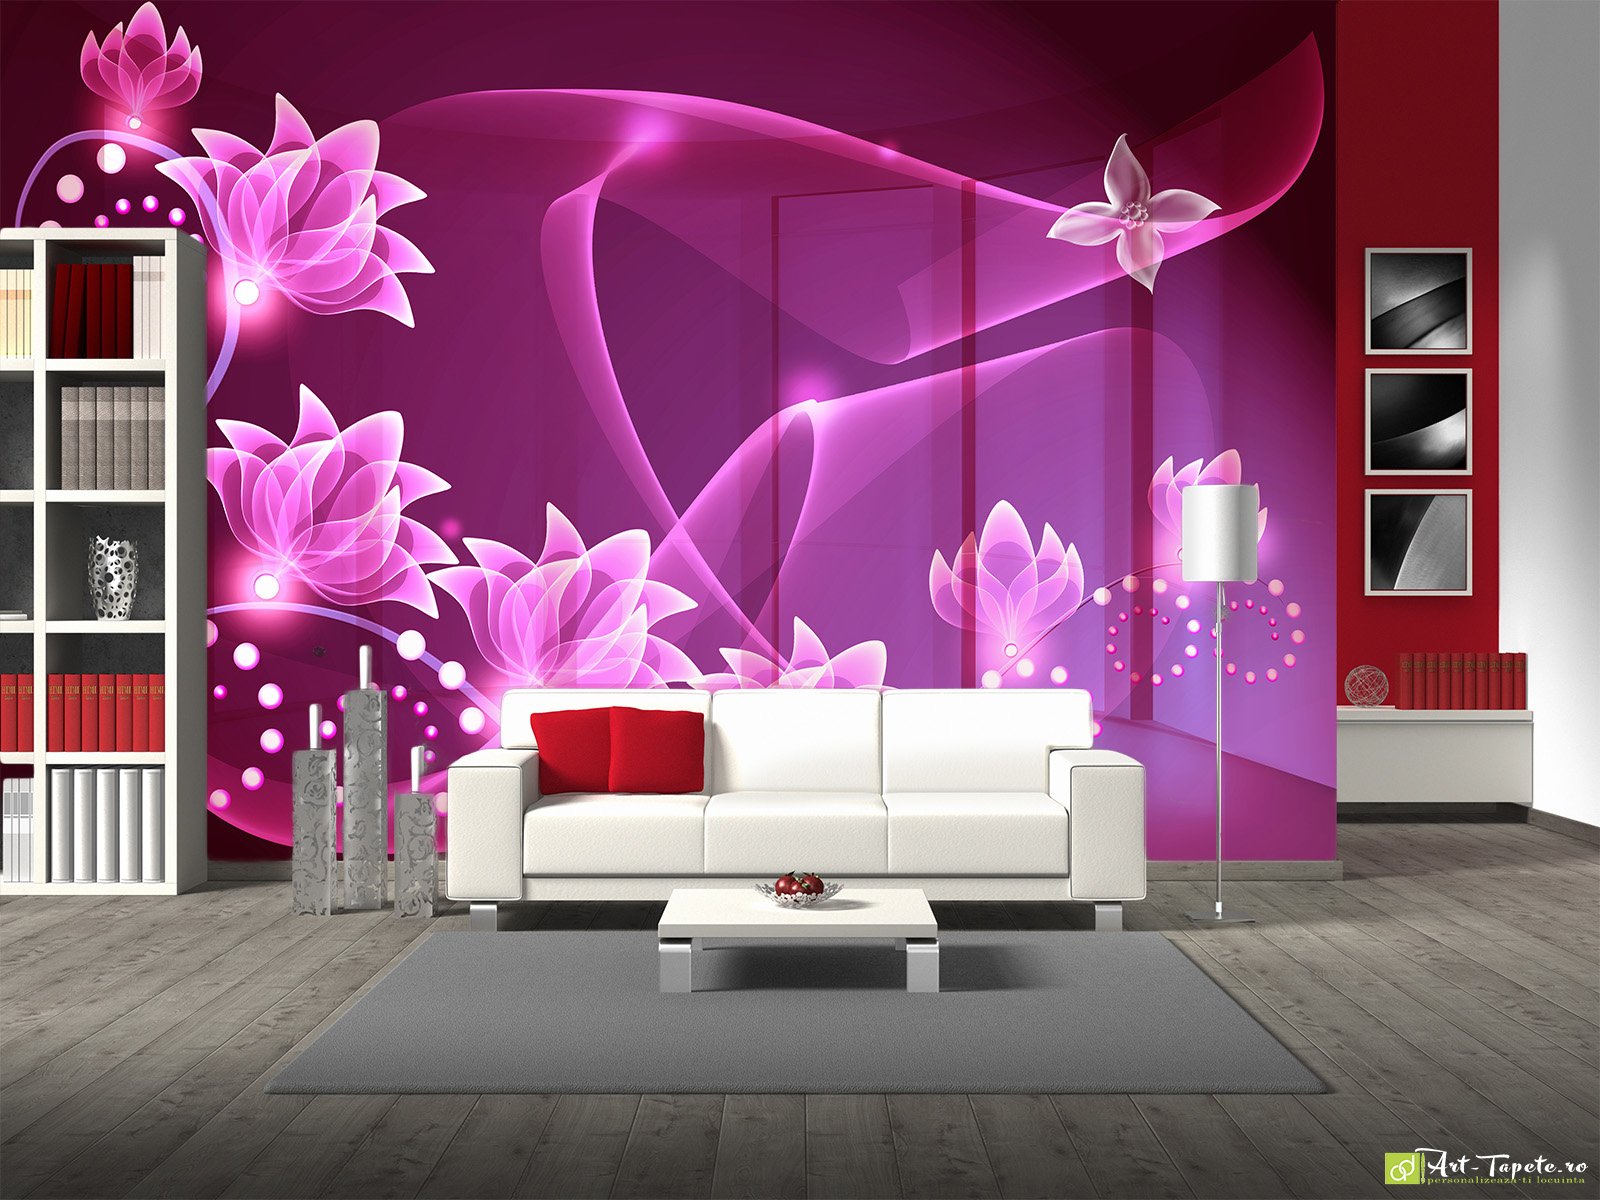 Wall Murals & Digital Wallpaper - Graphics, 3D Abstraction with pink  flowers  Amazing Digital Wallpapers add dimension and  character to your room